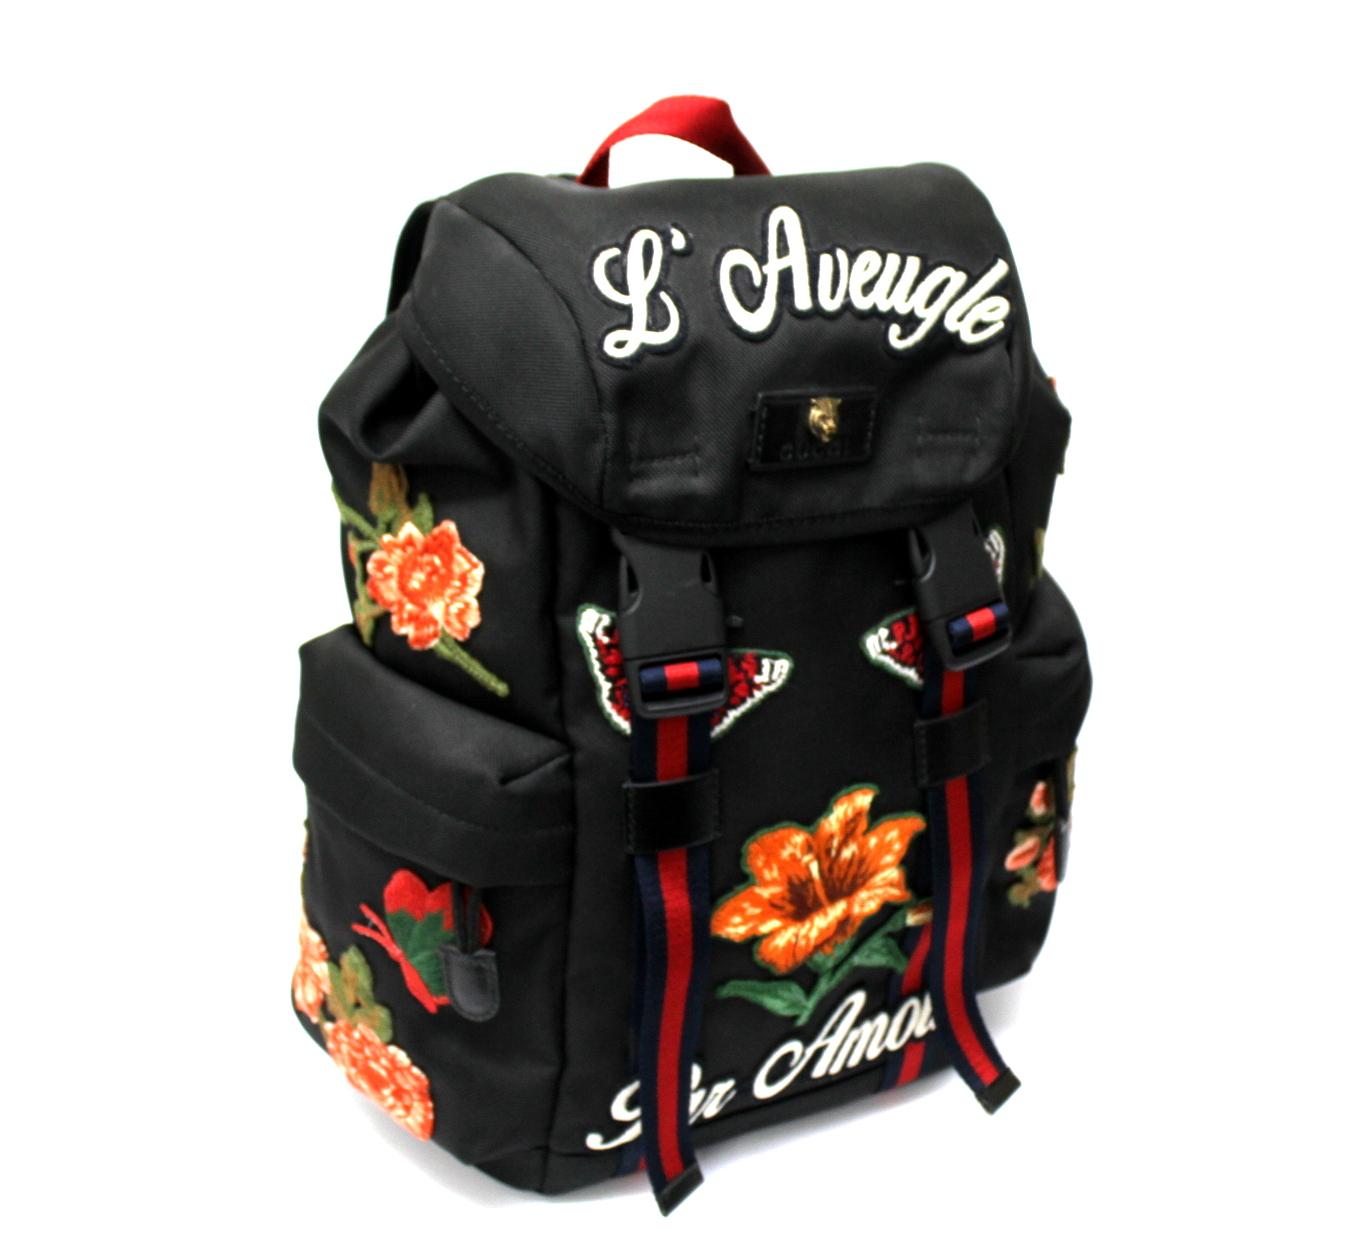 Gucci backpack, made of black canvas with floral patches and silver hardware.

The backpack is equipped with a snap hook closure, internally lined in waterproof fabric, quite roomy.

It also features two padded handles, a central handle and two side